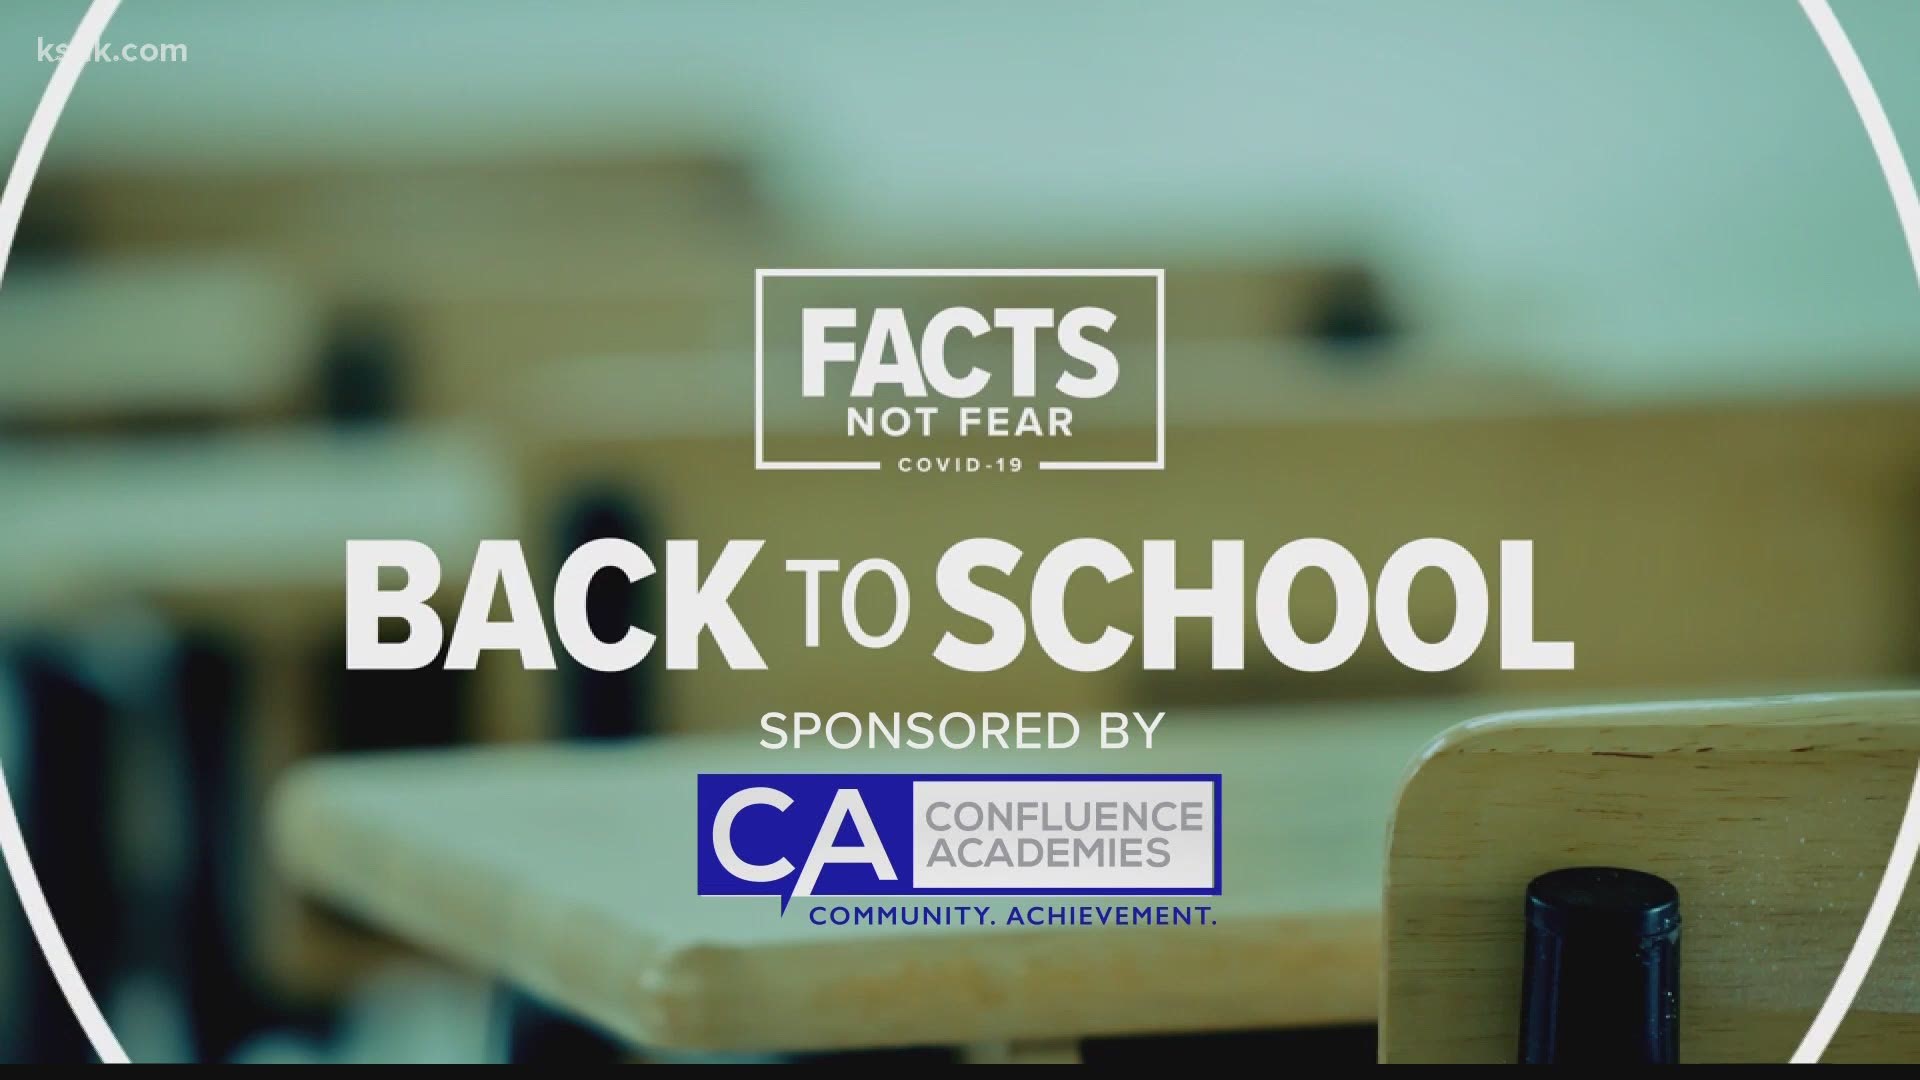 We are taking your questions about heading back to school, to the experts to get answers.